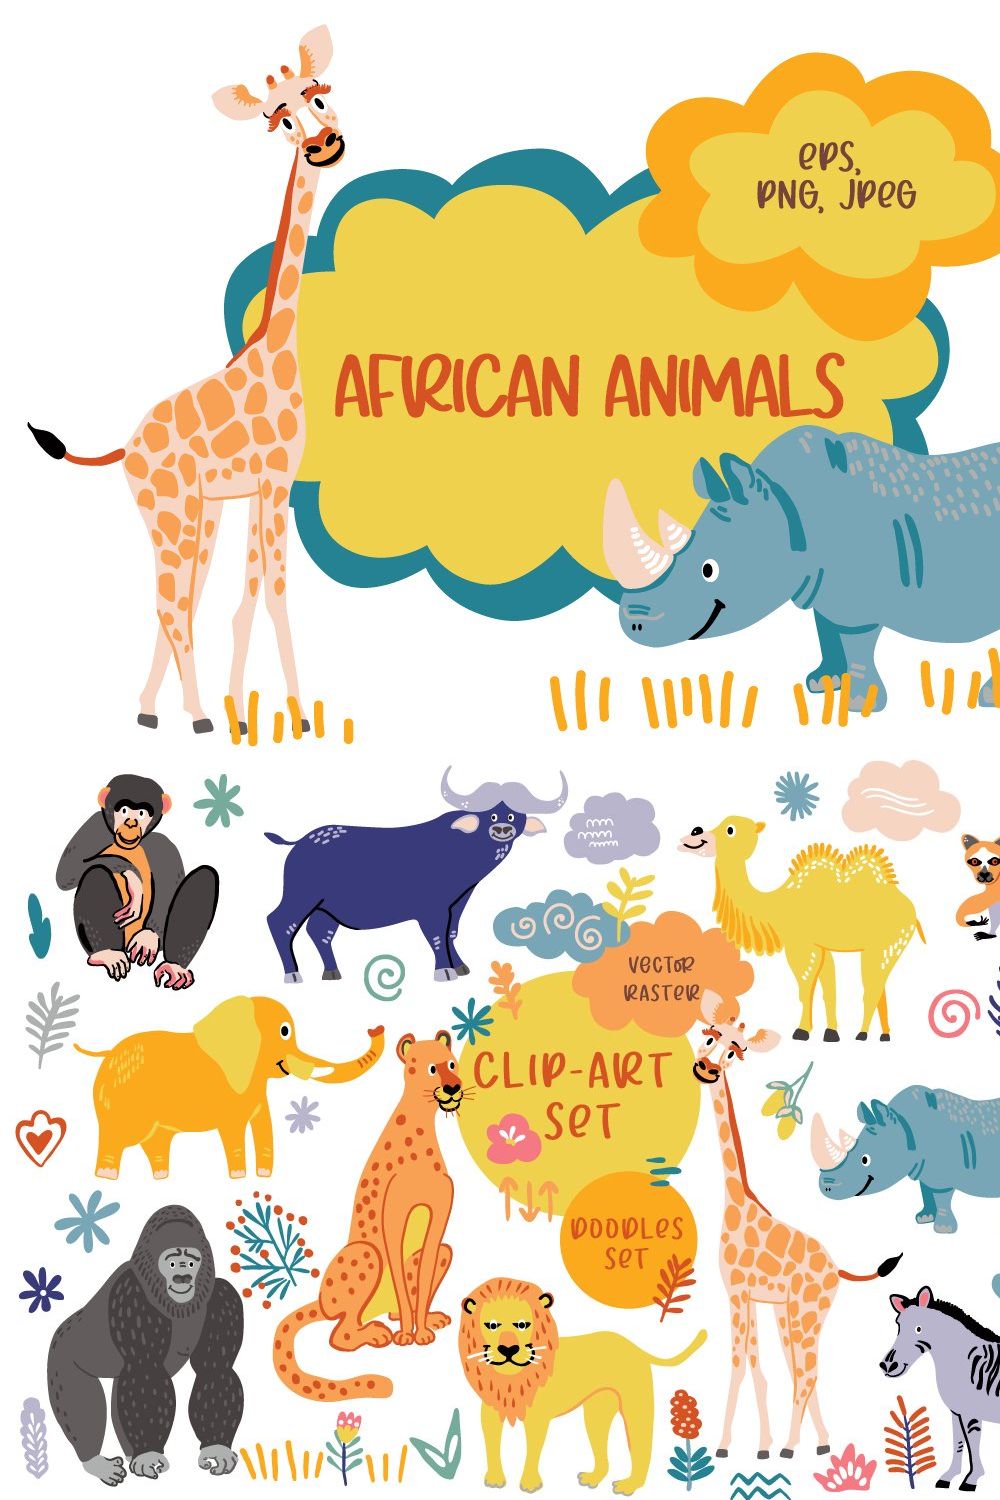 African animals clip art pinterest preview image.